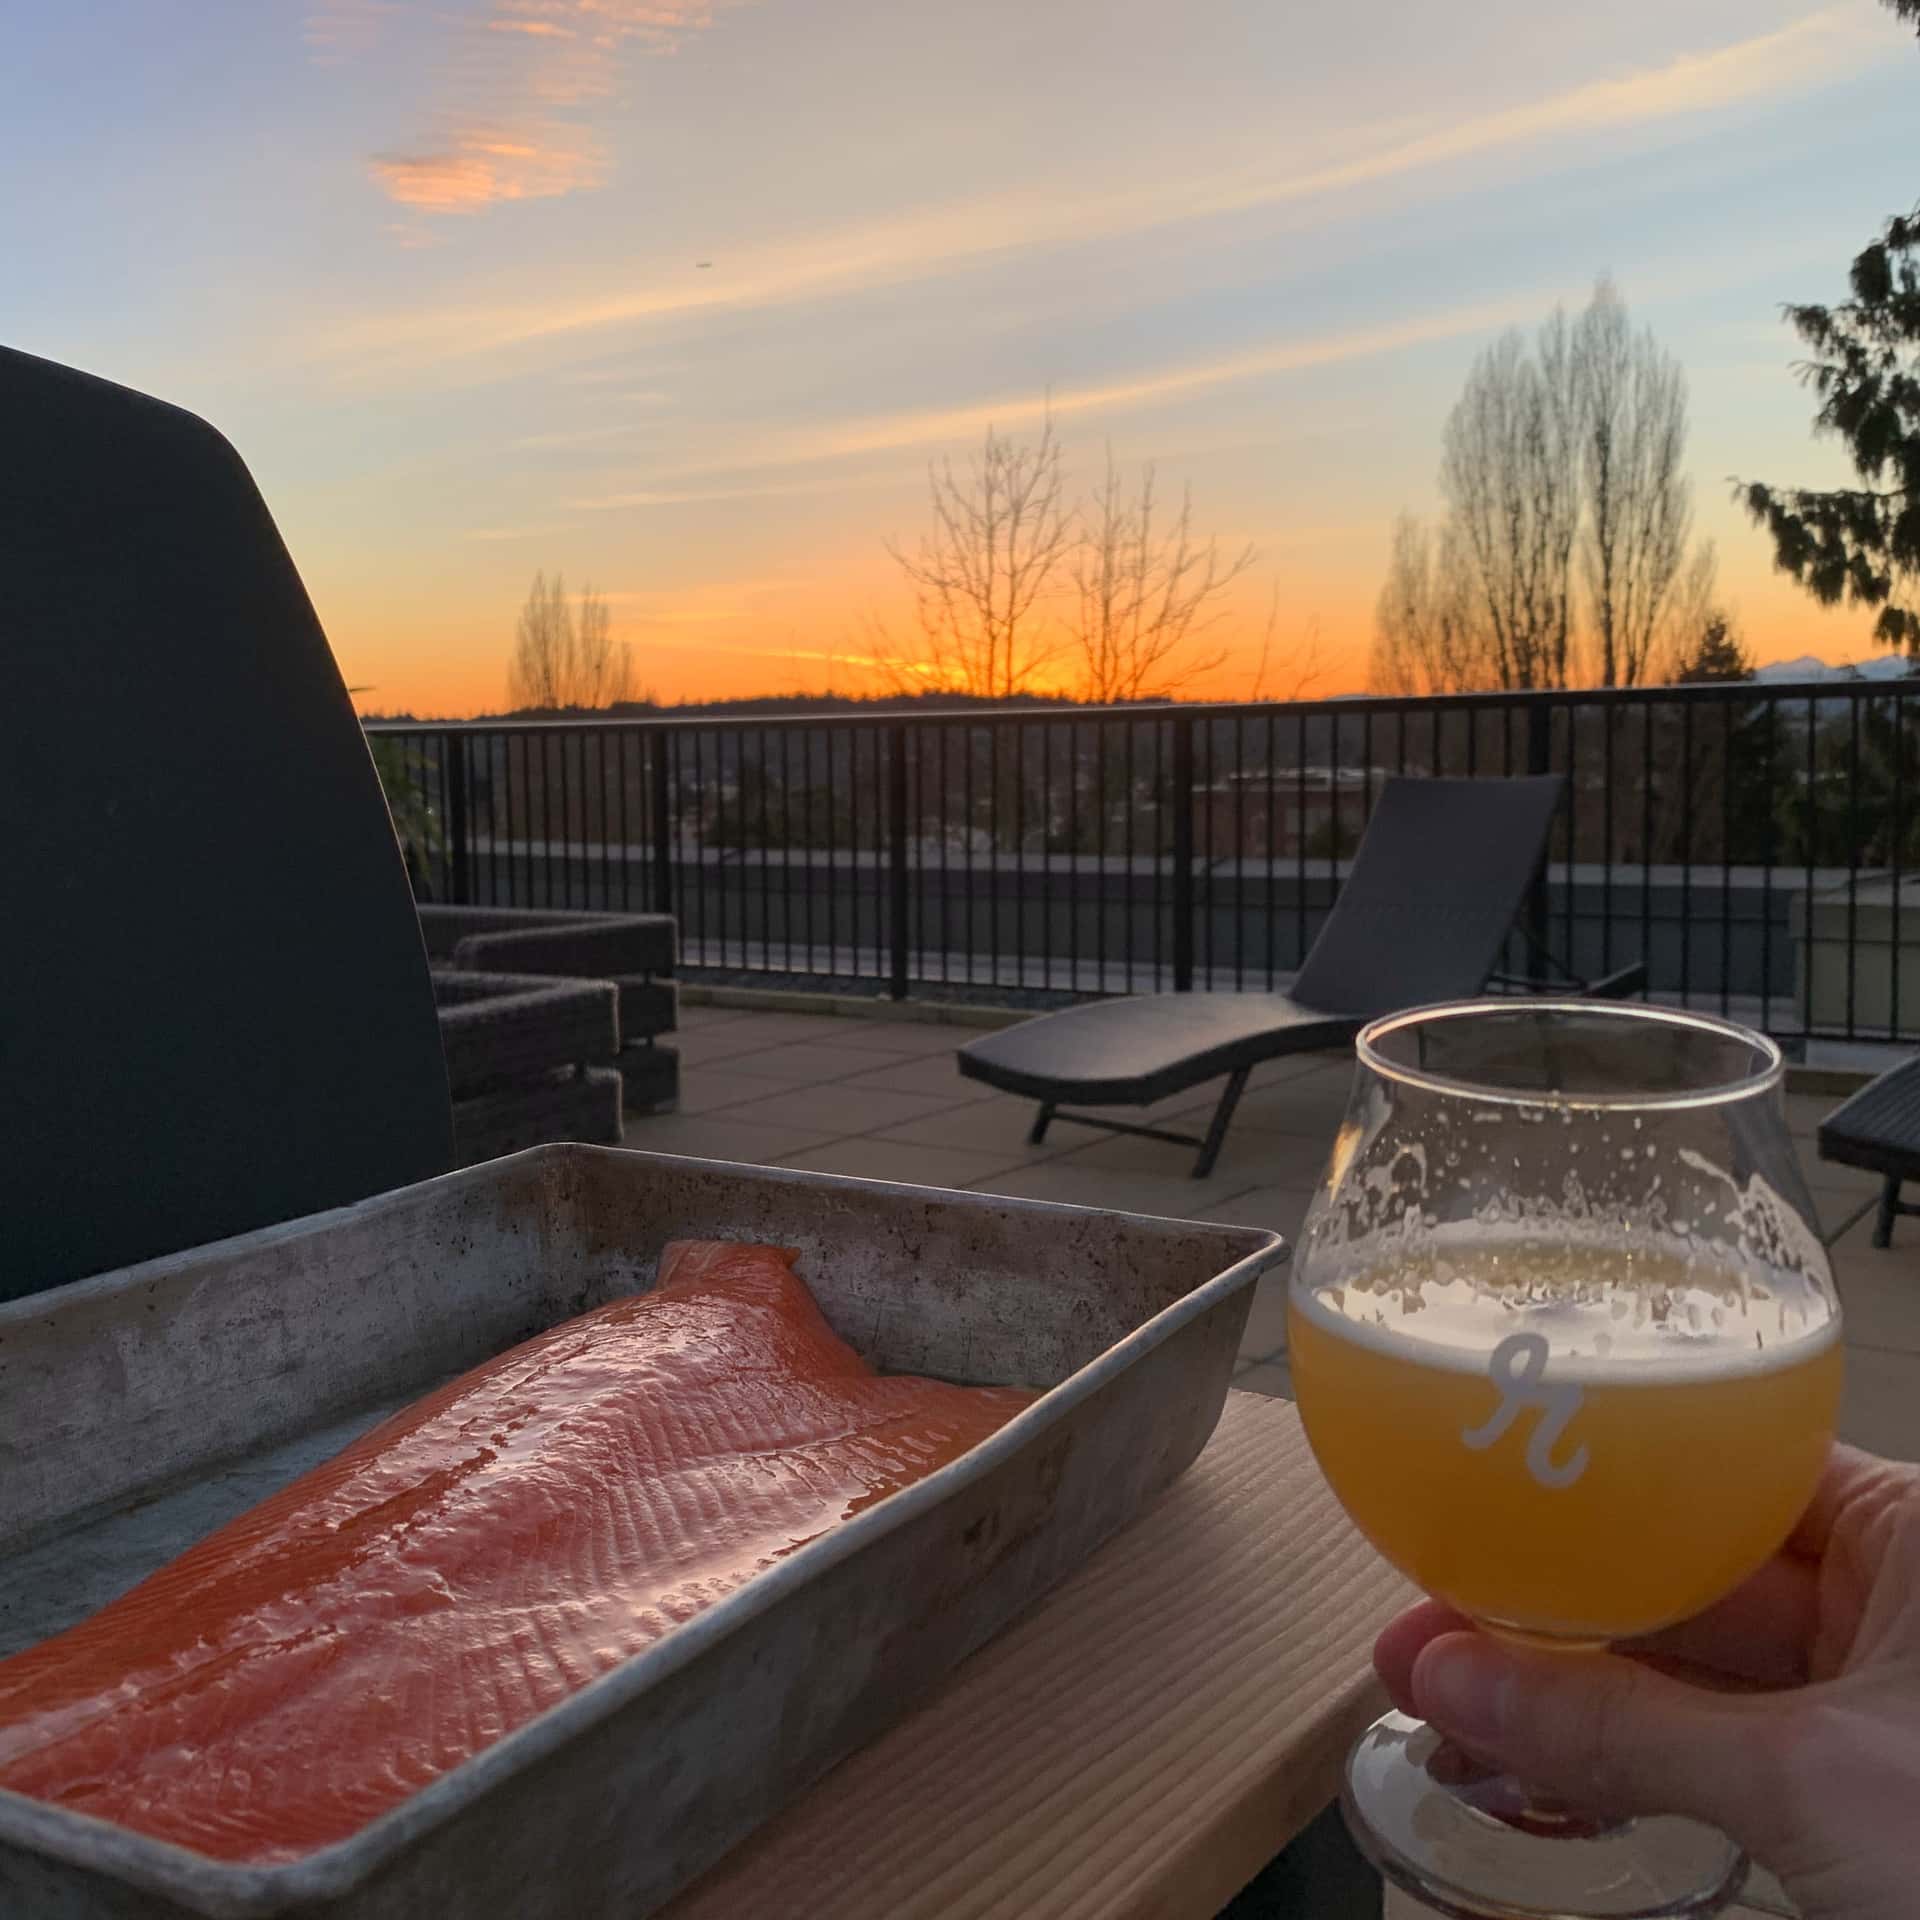 raw fillet of steelhead trout and Reuben’s Brews Double Crush Hazy IIPA next to a grill